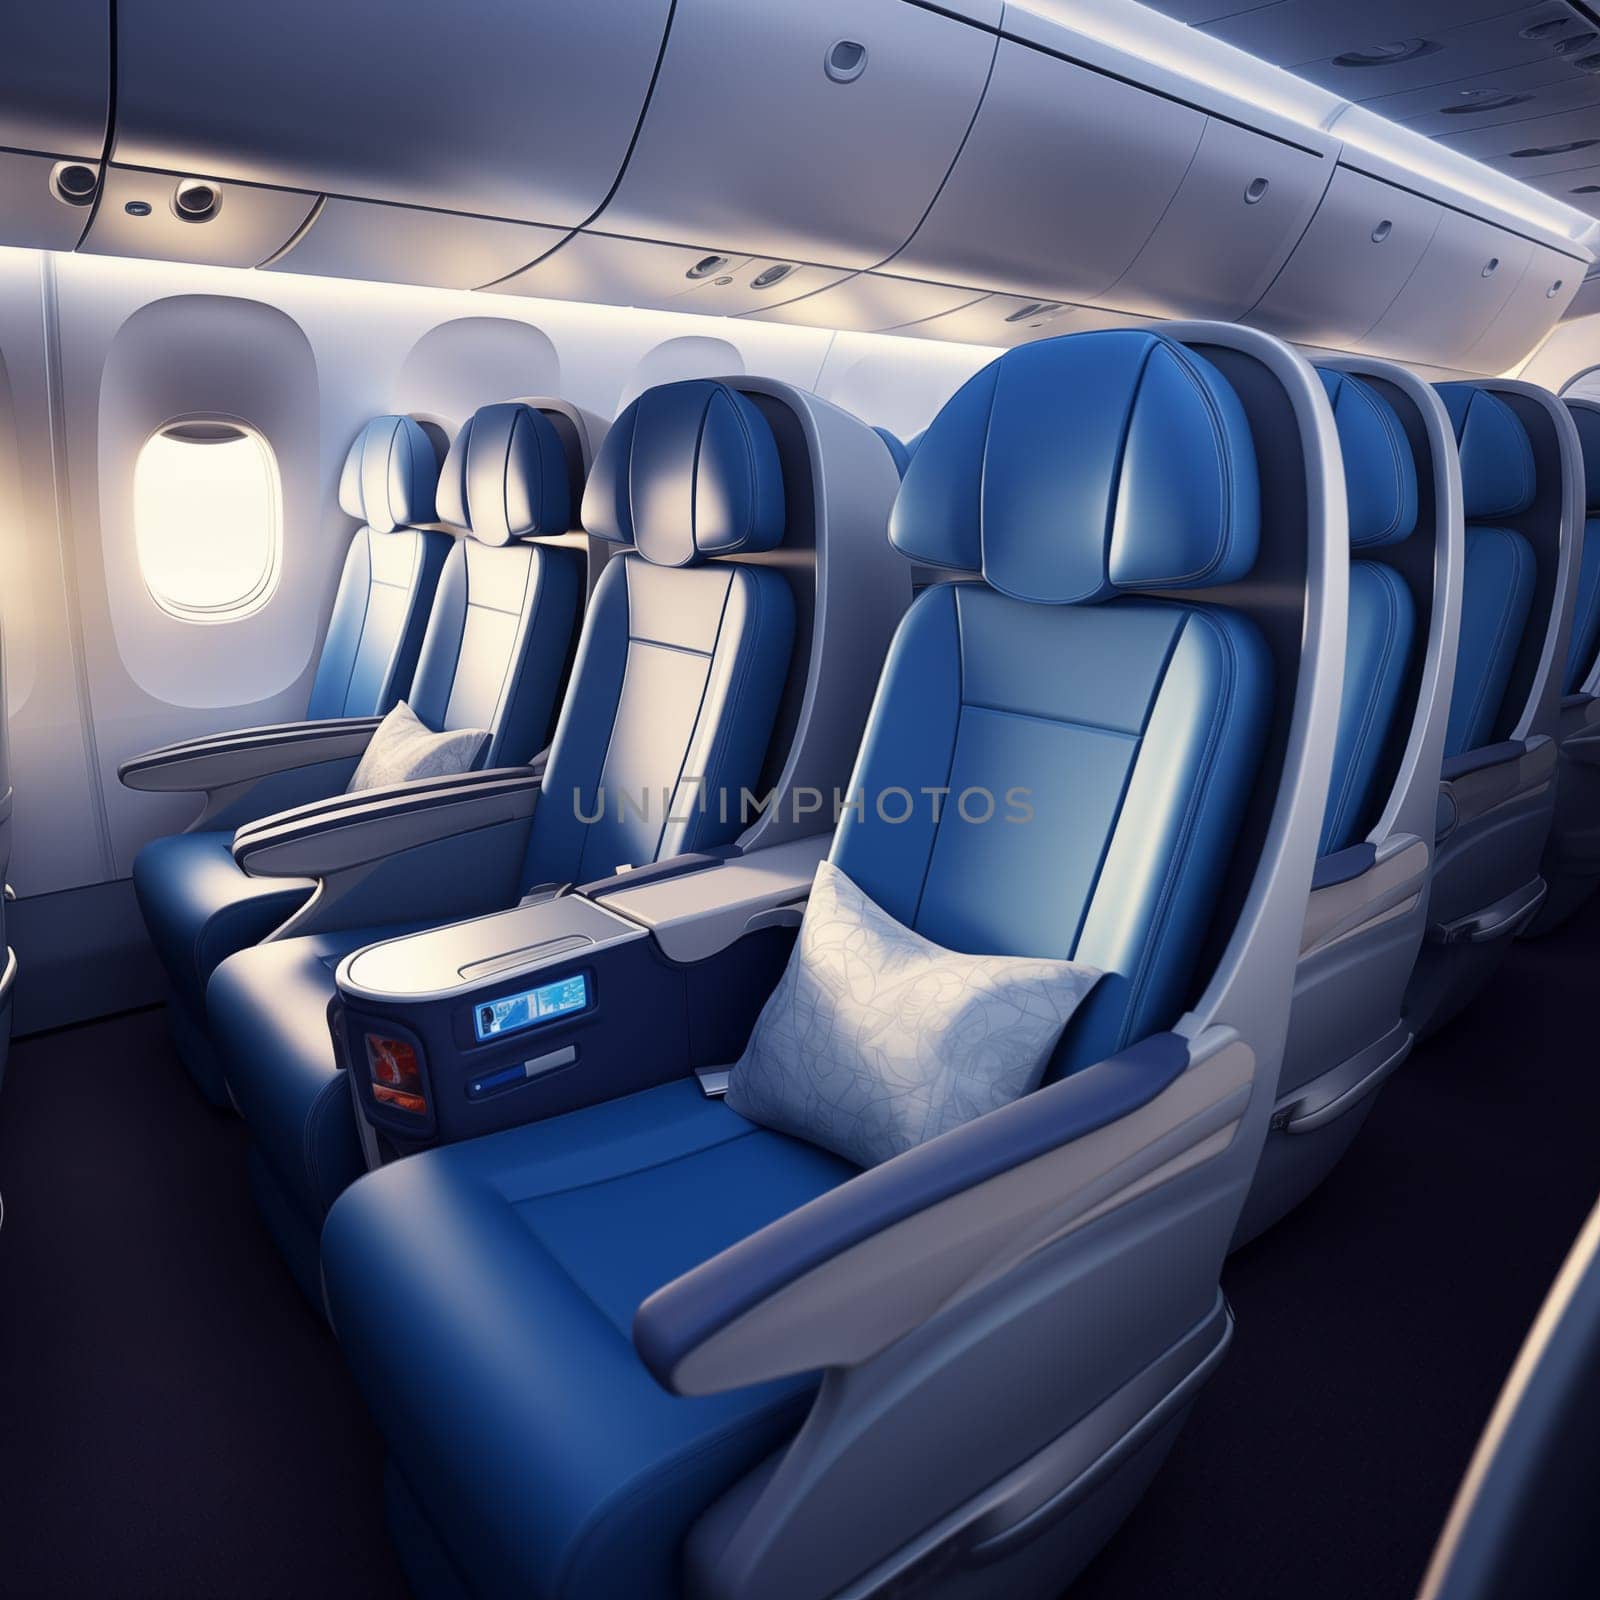 A view of the interior cabin of a Dreamliner commercial airplane, featuring comfortable blue leather seats.